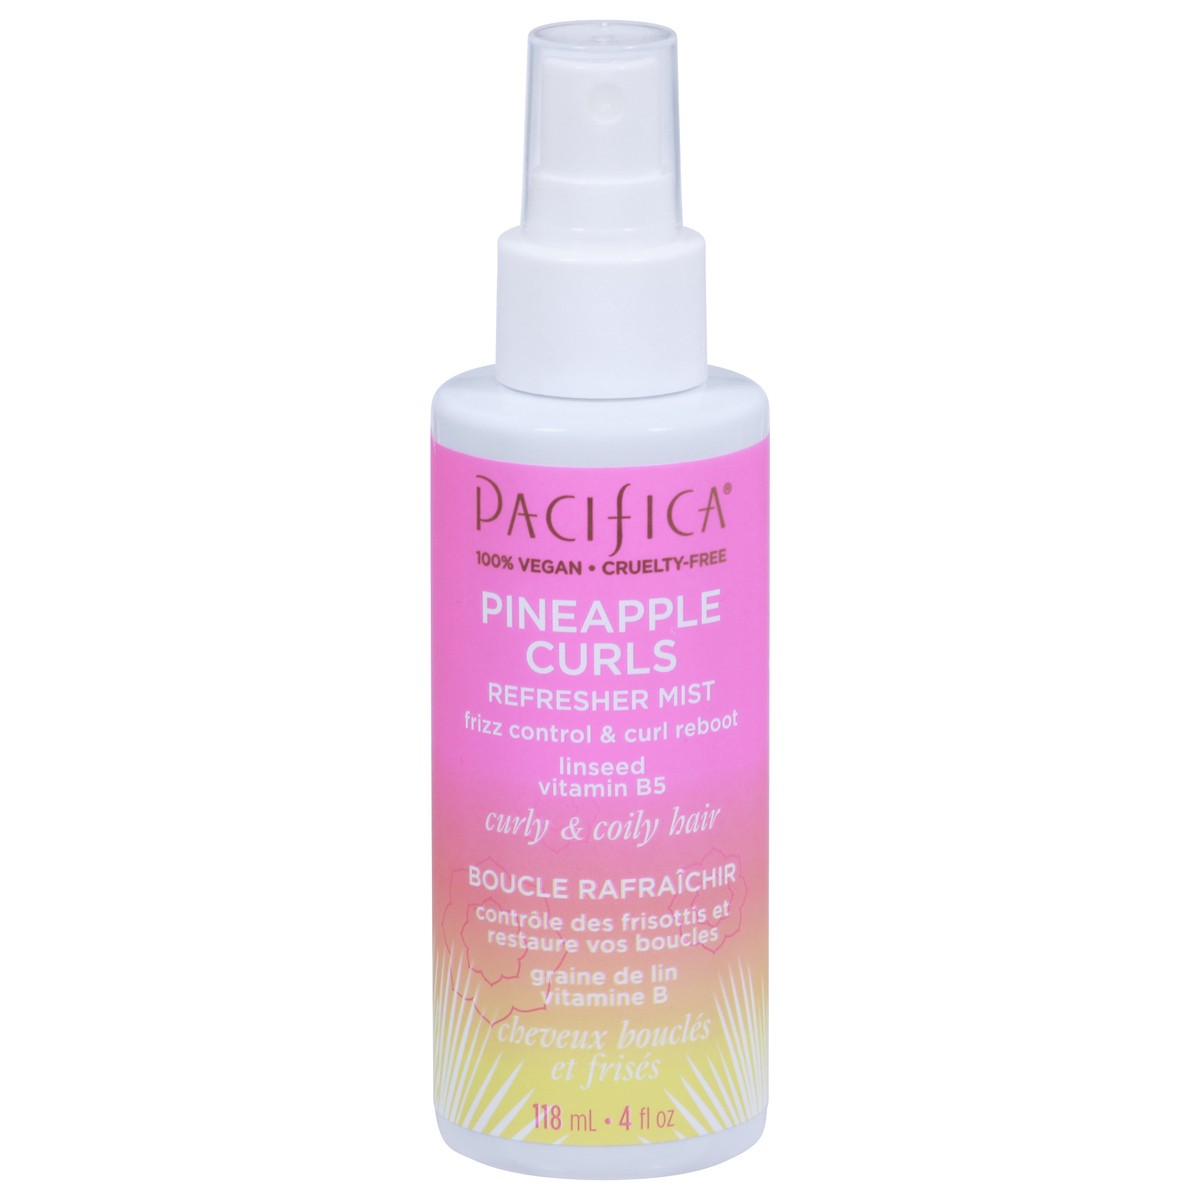 slide 1 of 9, Pacifica Curly & Coily Hair Pineapple Curls Refresher Mist 4 fl oz, 1 ct